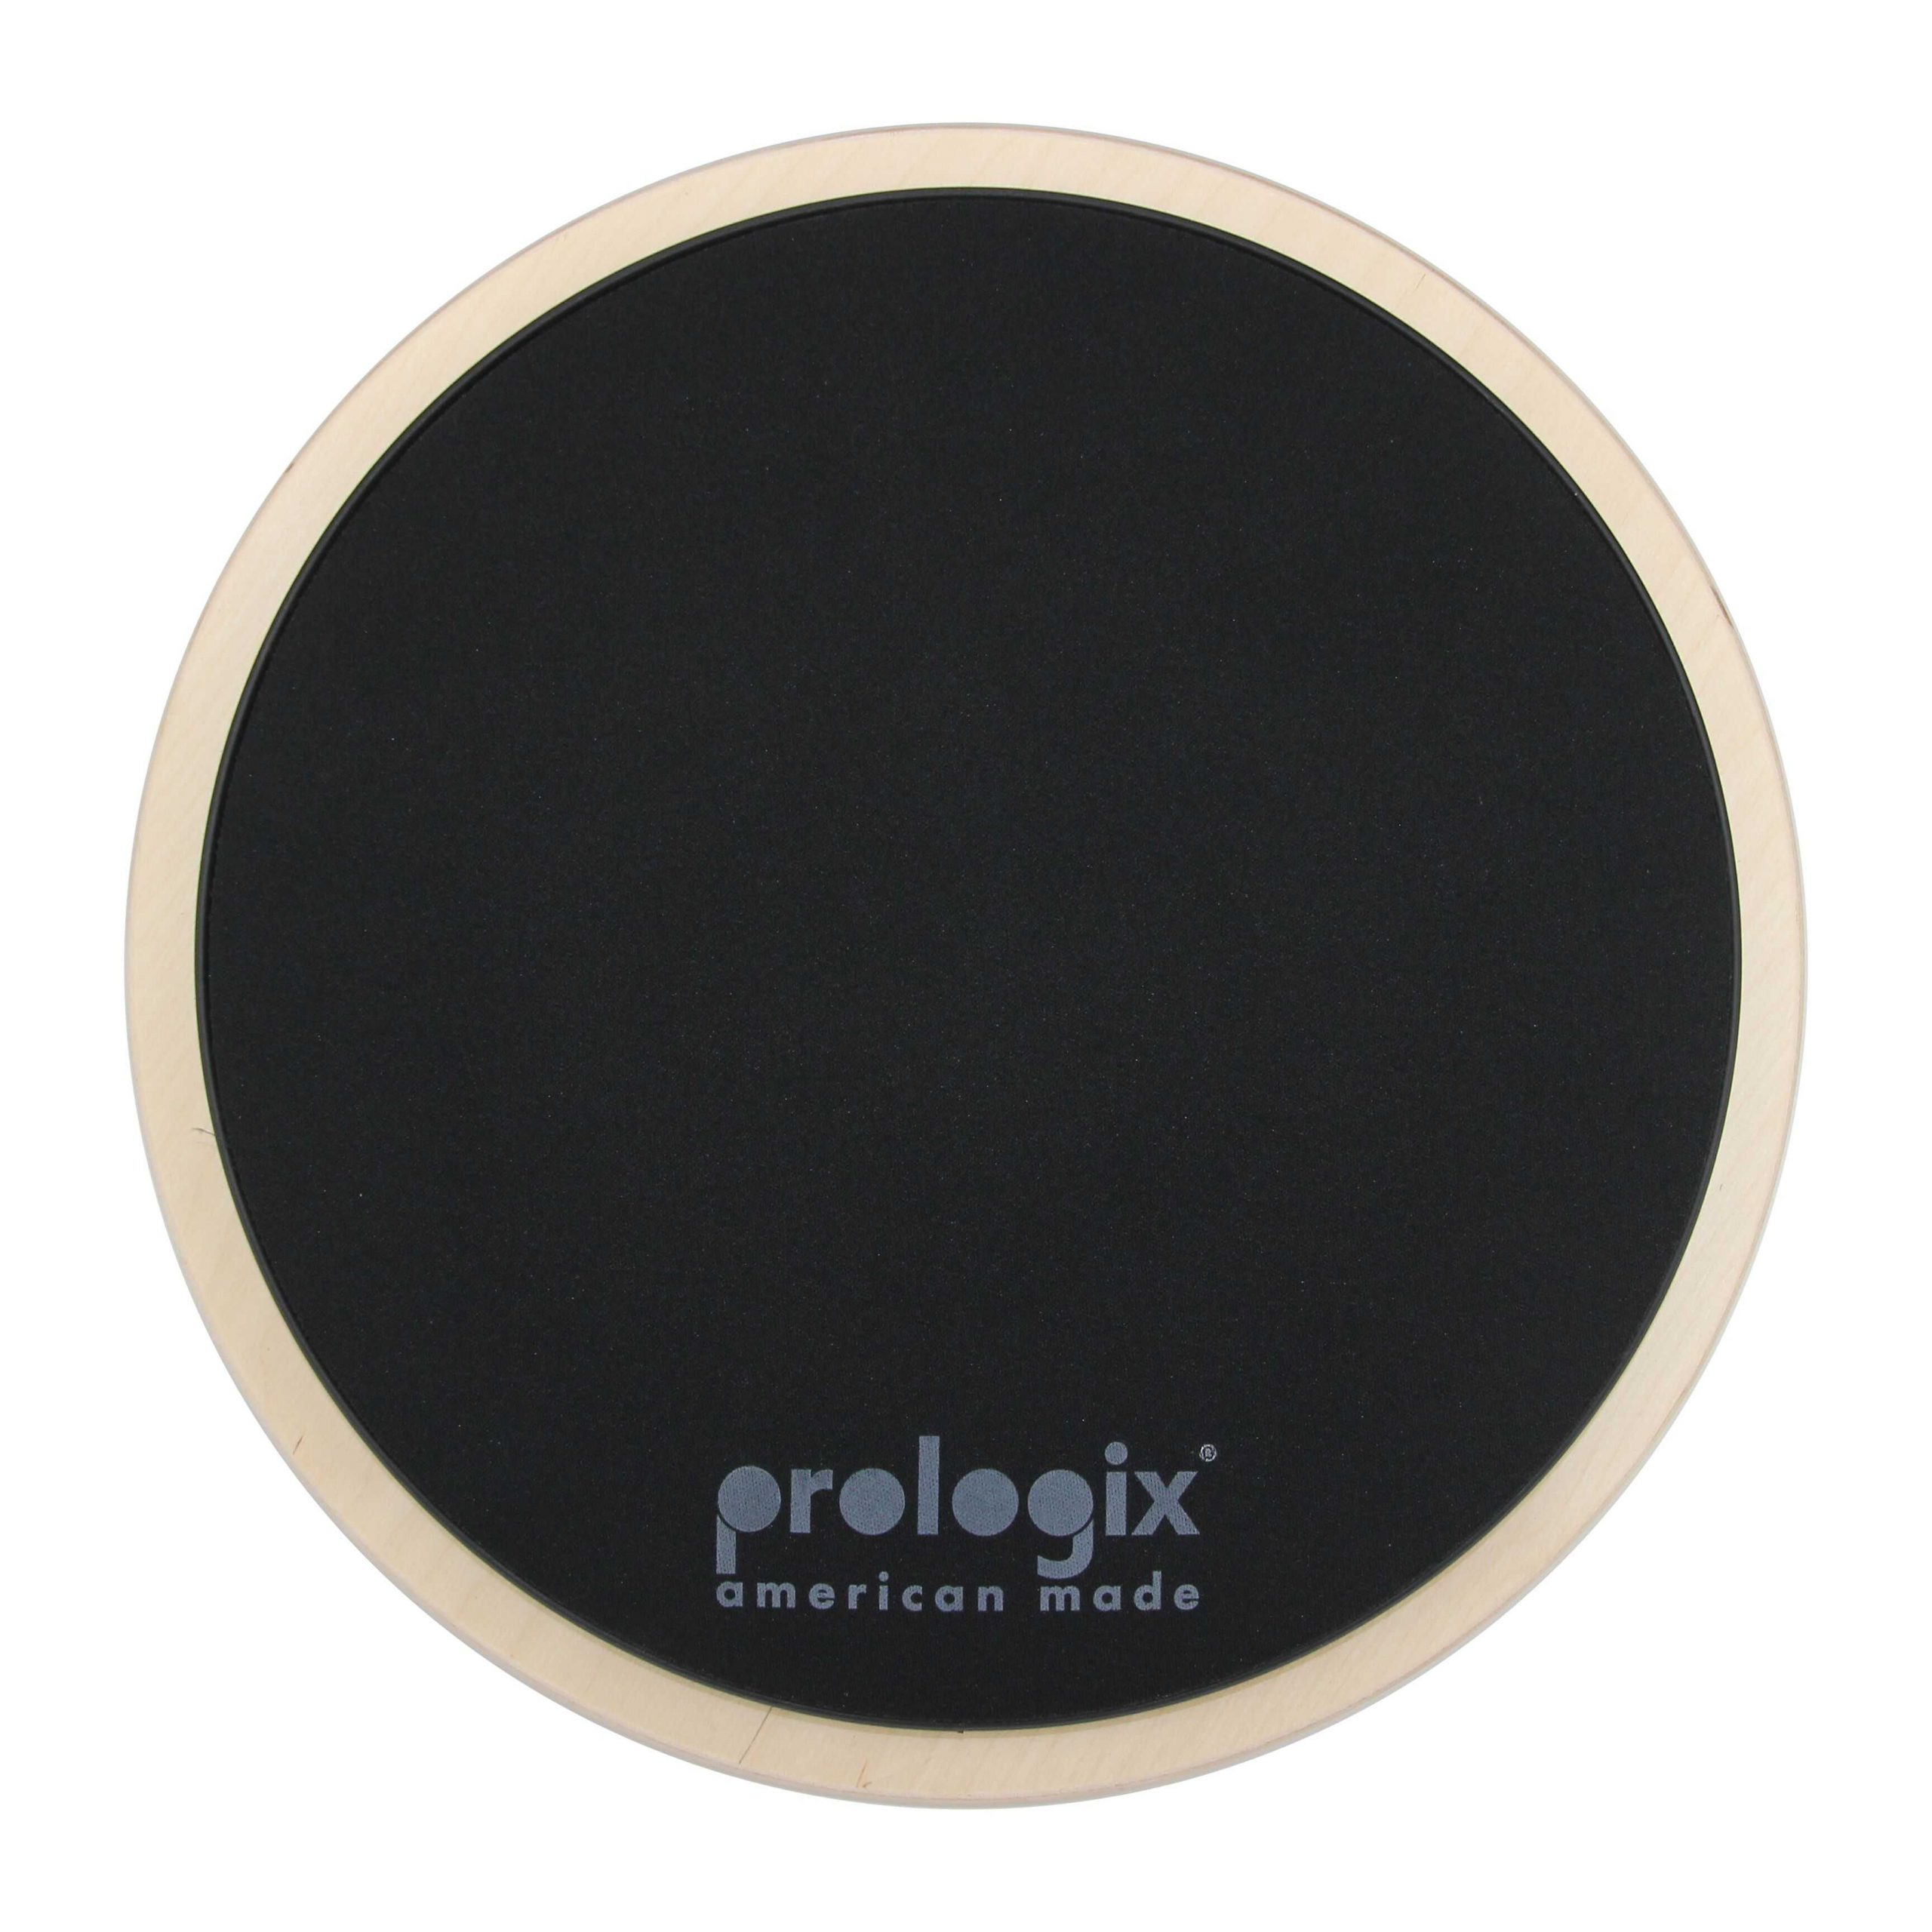 Prologix Black Out Pad 12" with Rim Extreme Resistance